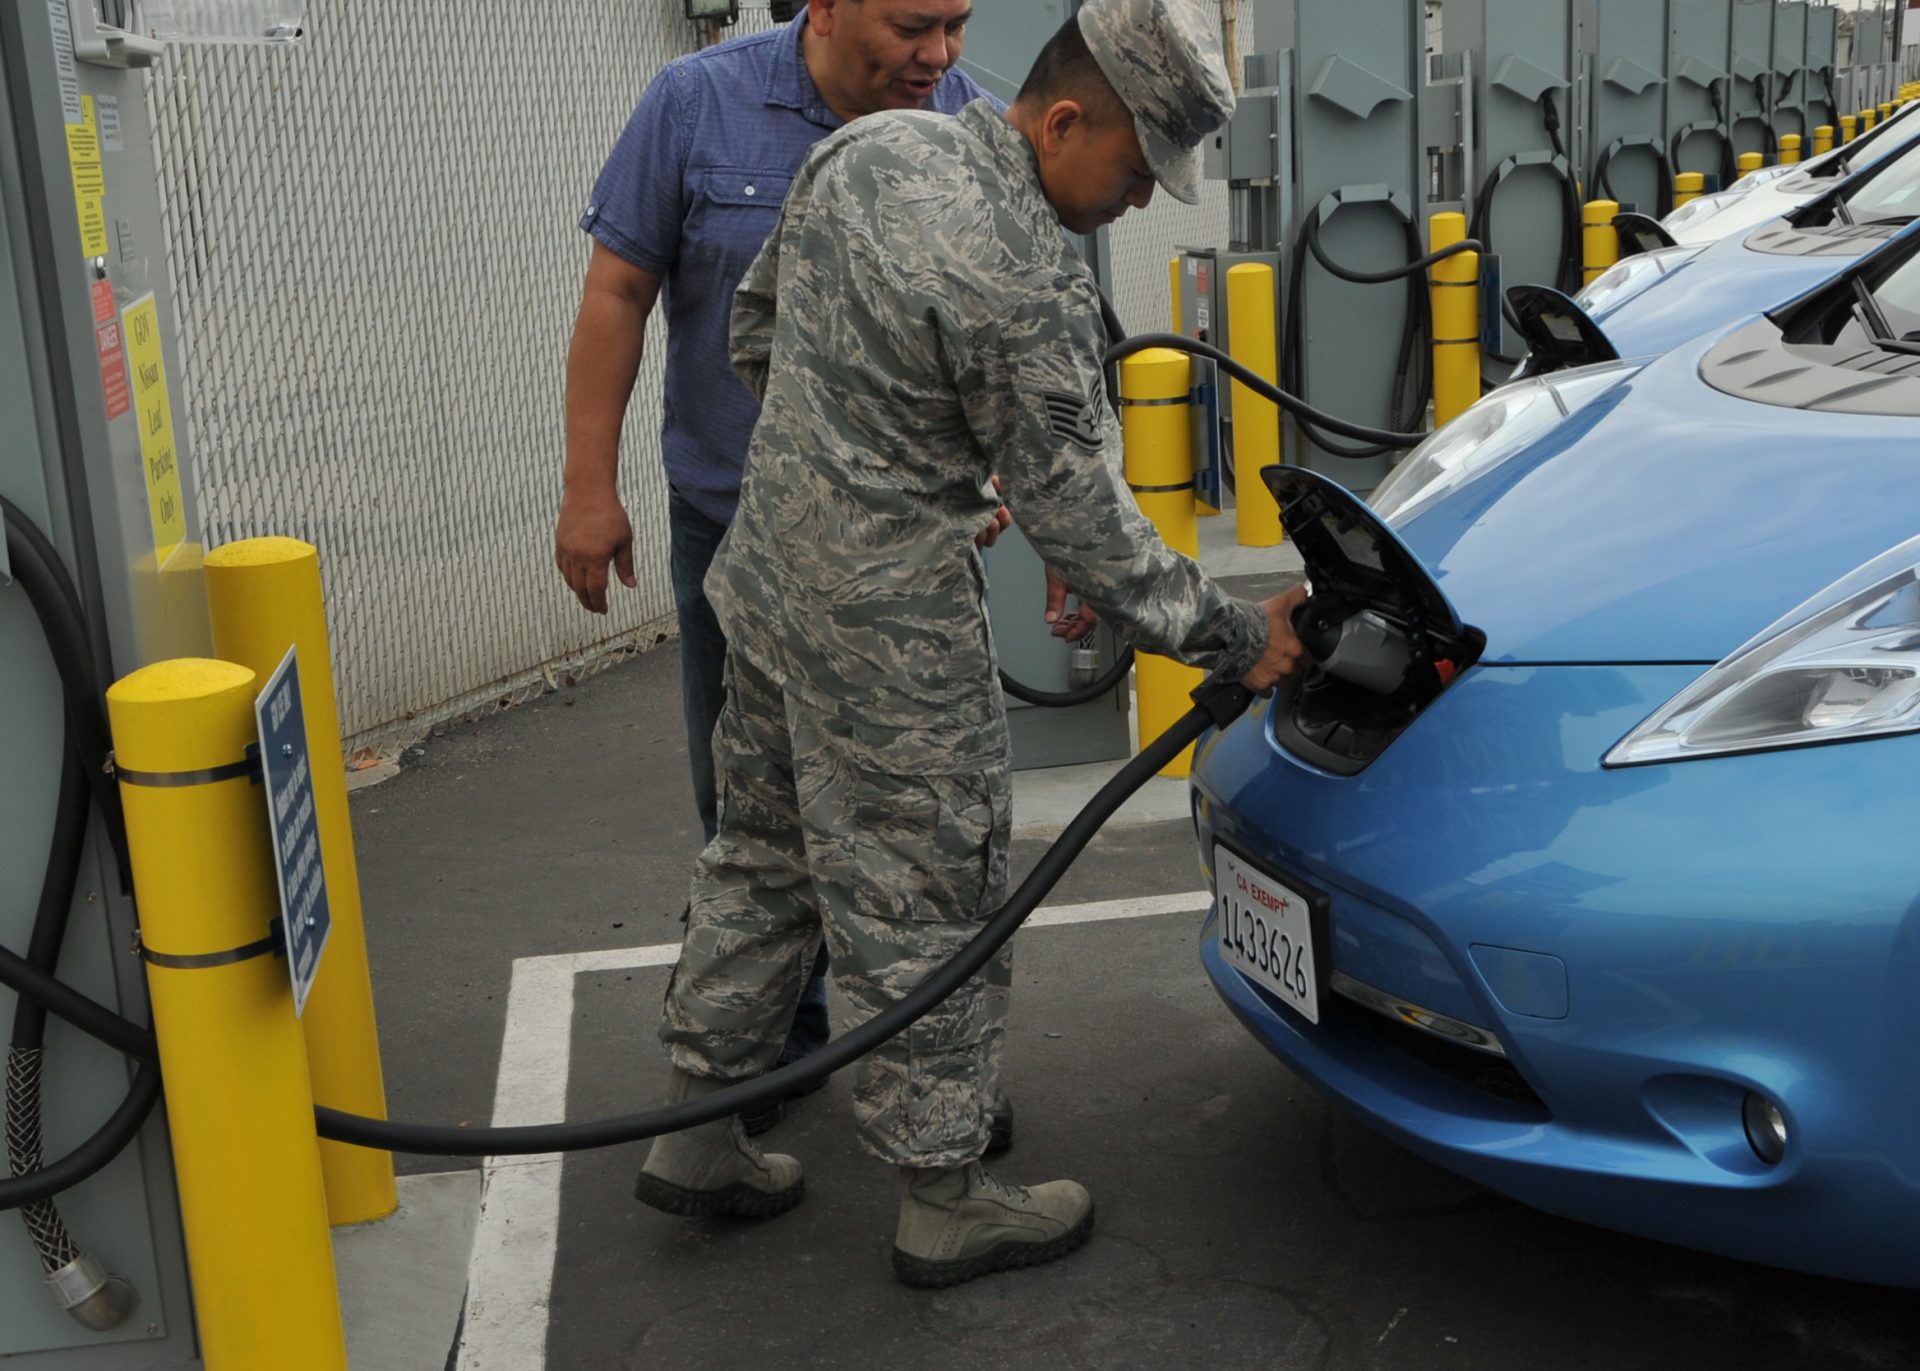 Nissan LEAF battery replacement is becoming a standard procedure for these quirky, fun little cars. Image Los Angeles Air Force Base Space and Missile System Center, Public domain, via Wikimedia Commons